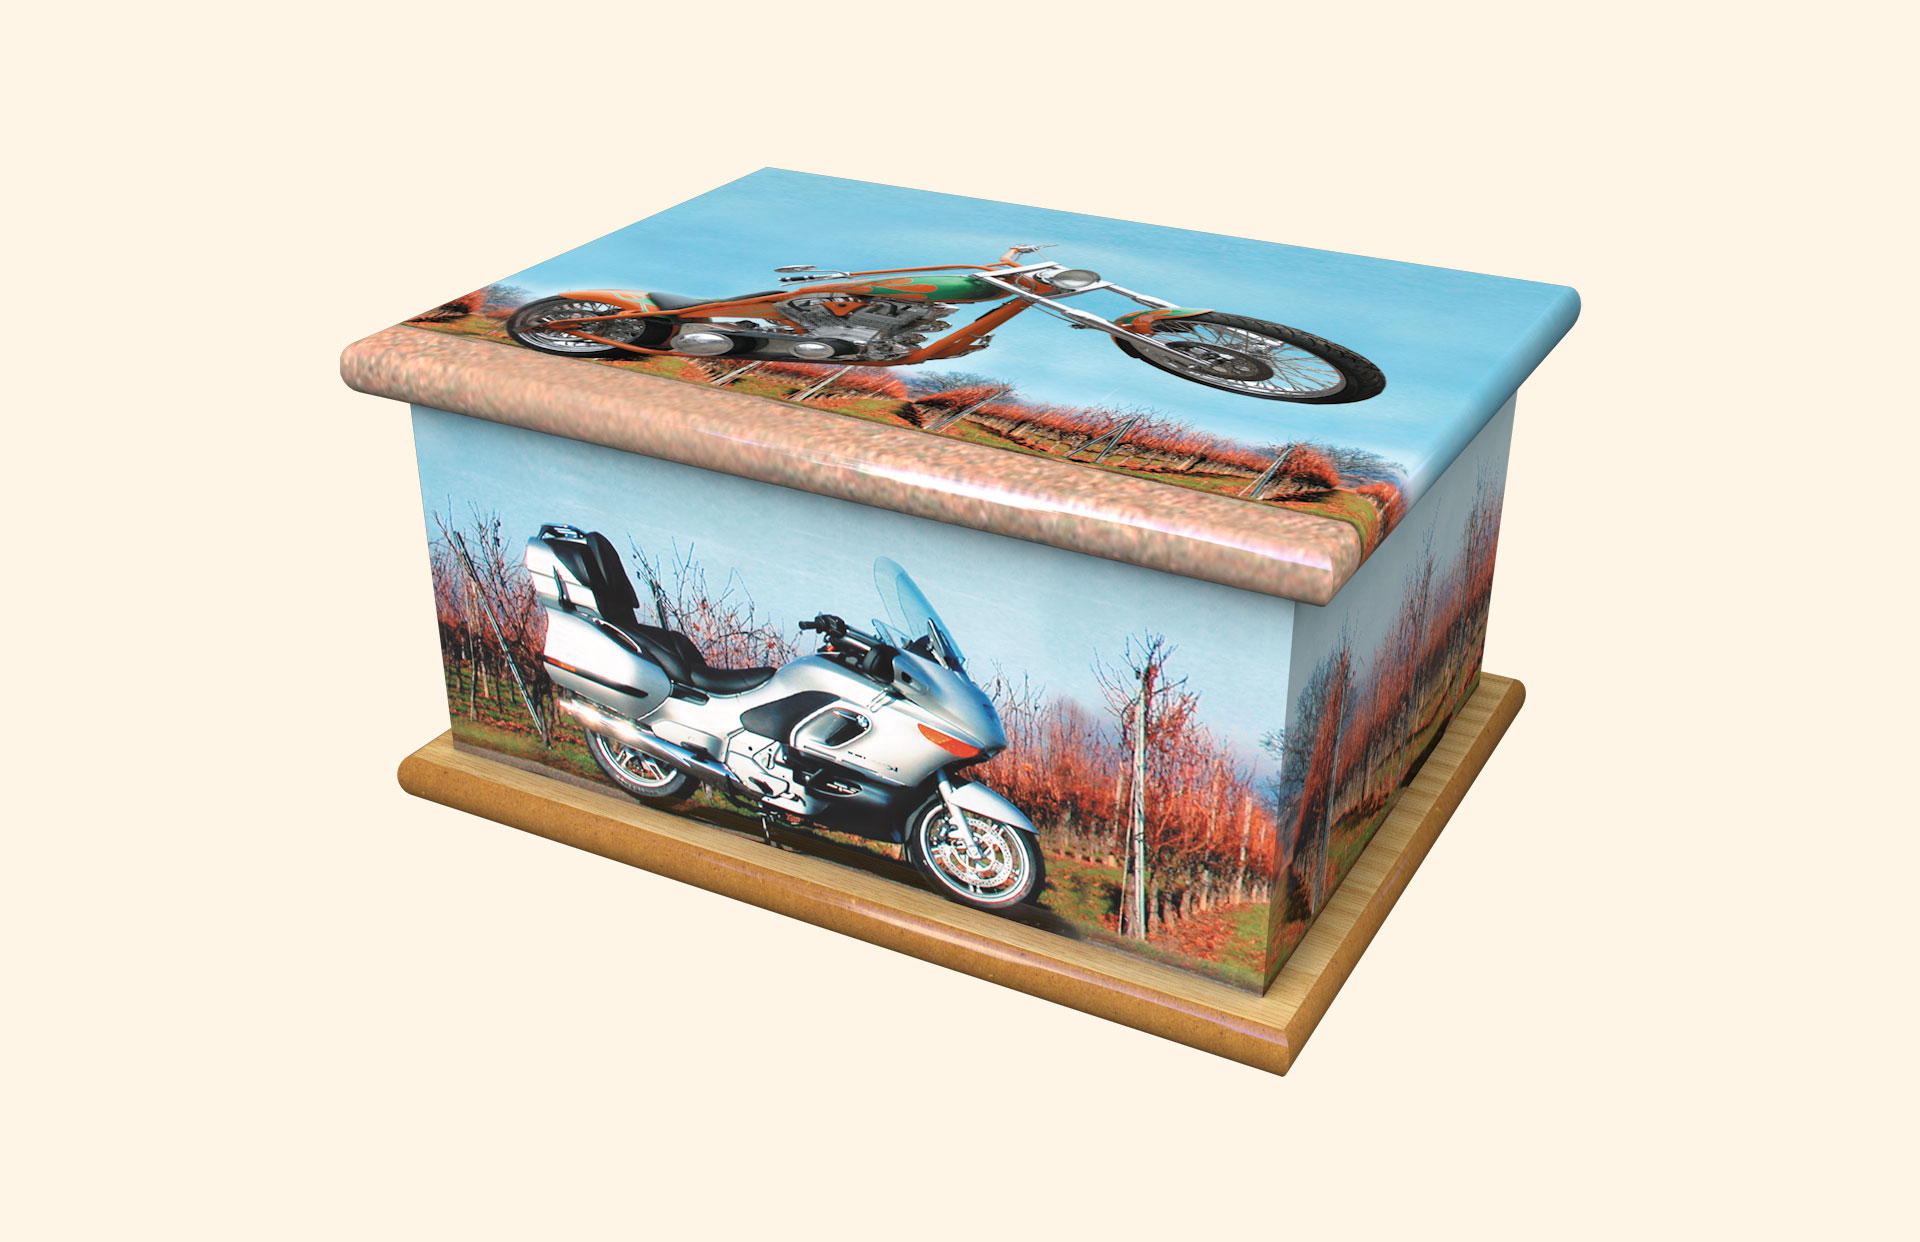 Easy Rider adult ashes casket